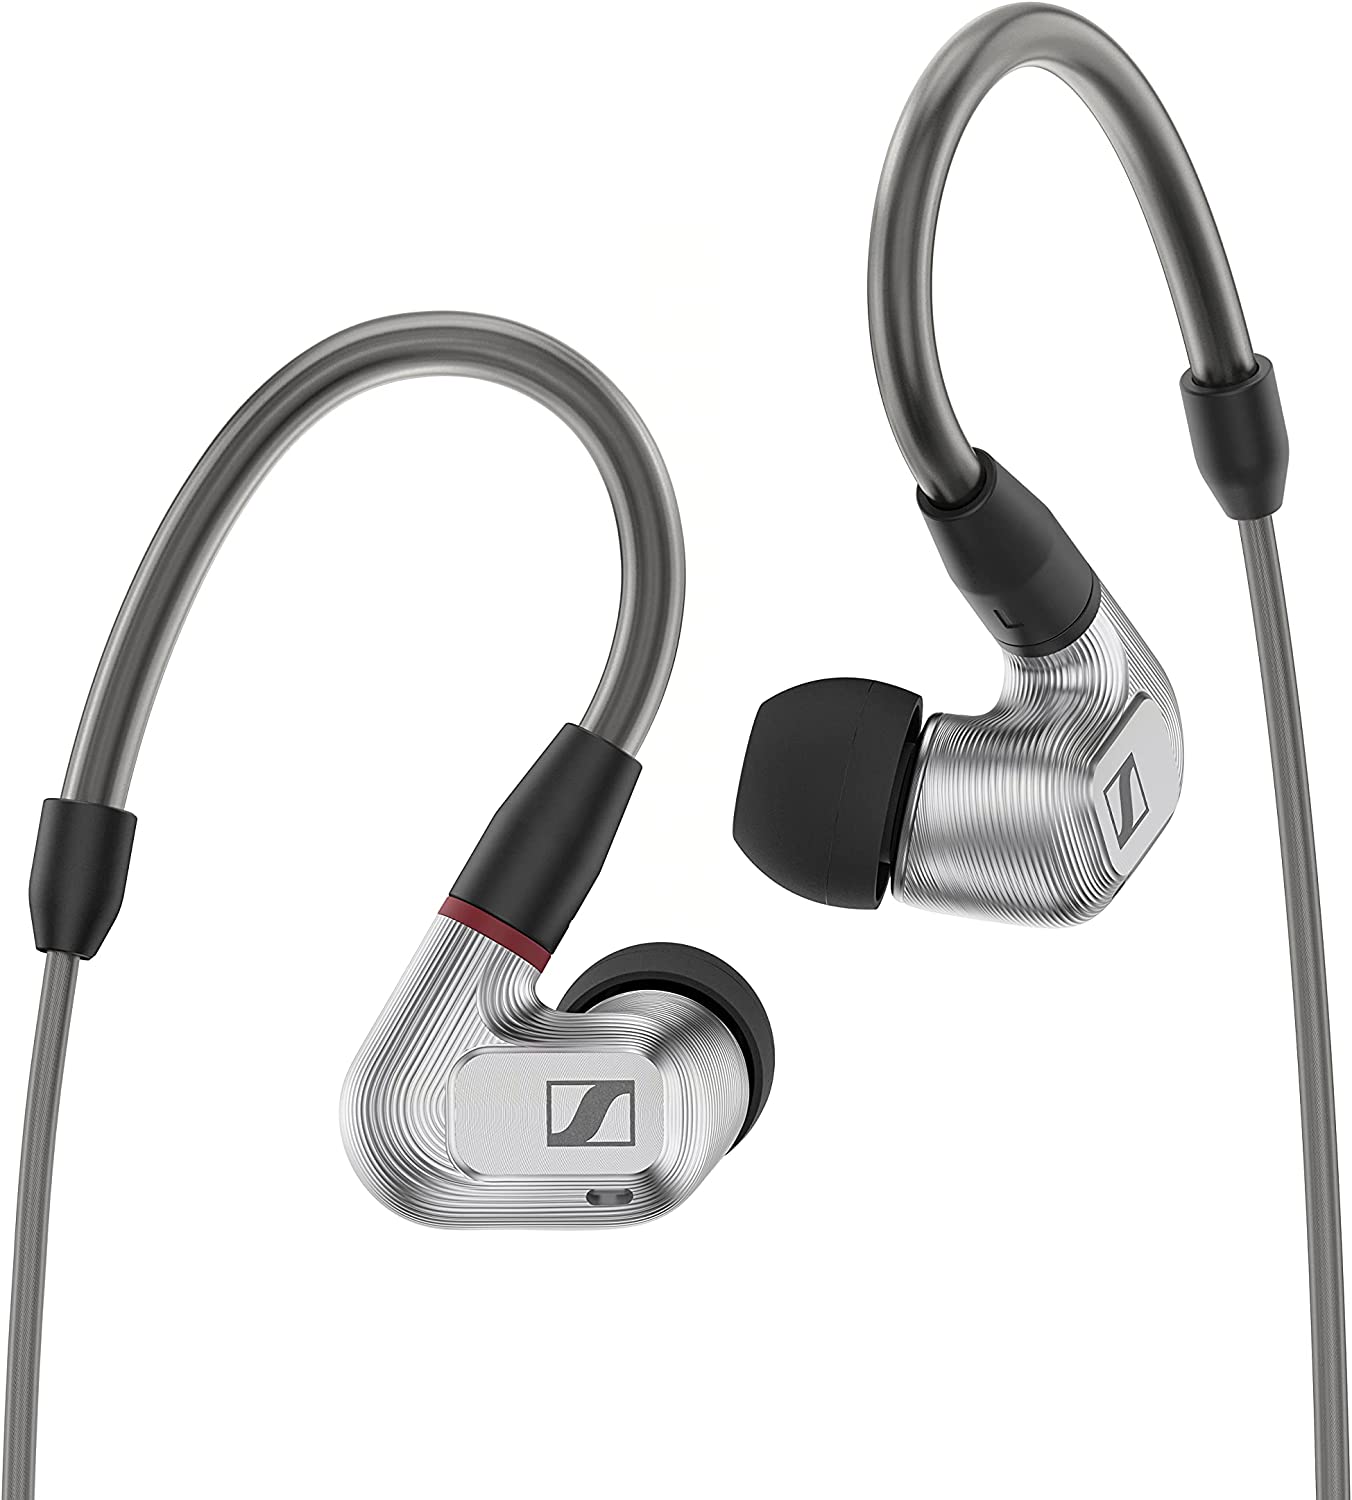 Sennheiser Ie 900 Audiophile In Ear Monitors Trueresponse Transducers With X3r Technology For Balanced Sound